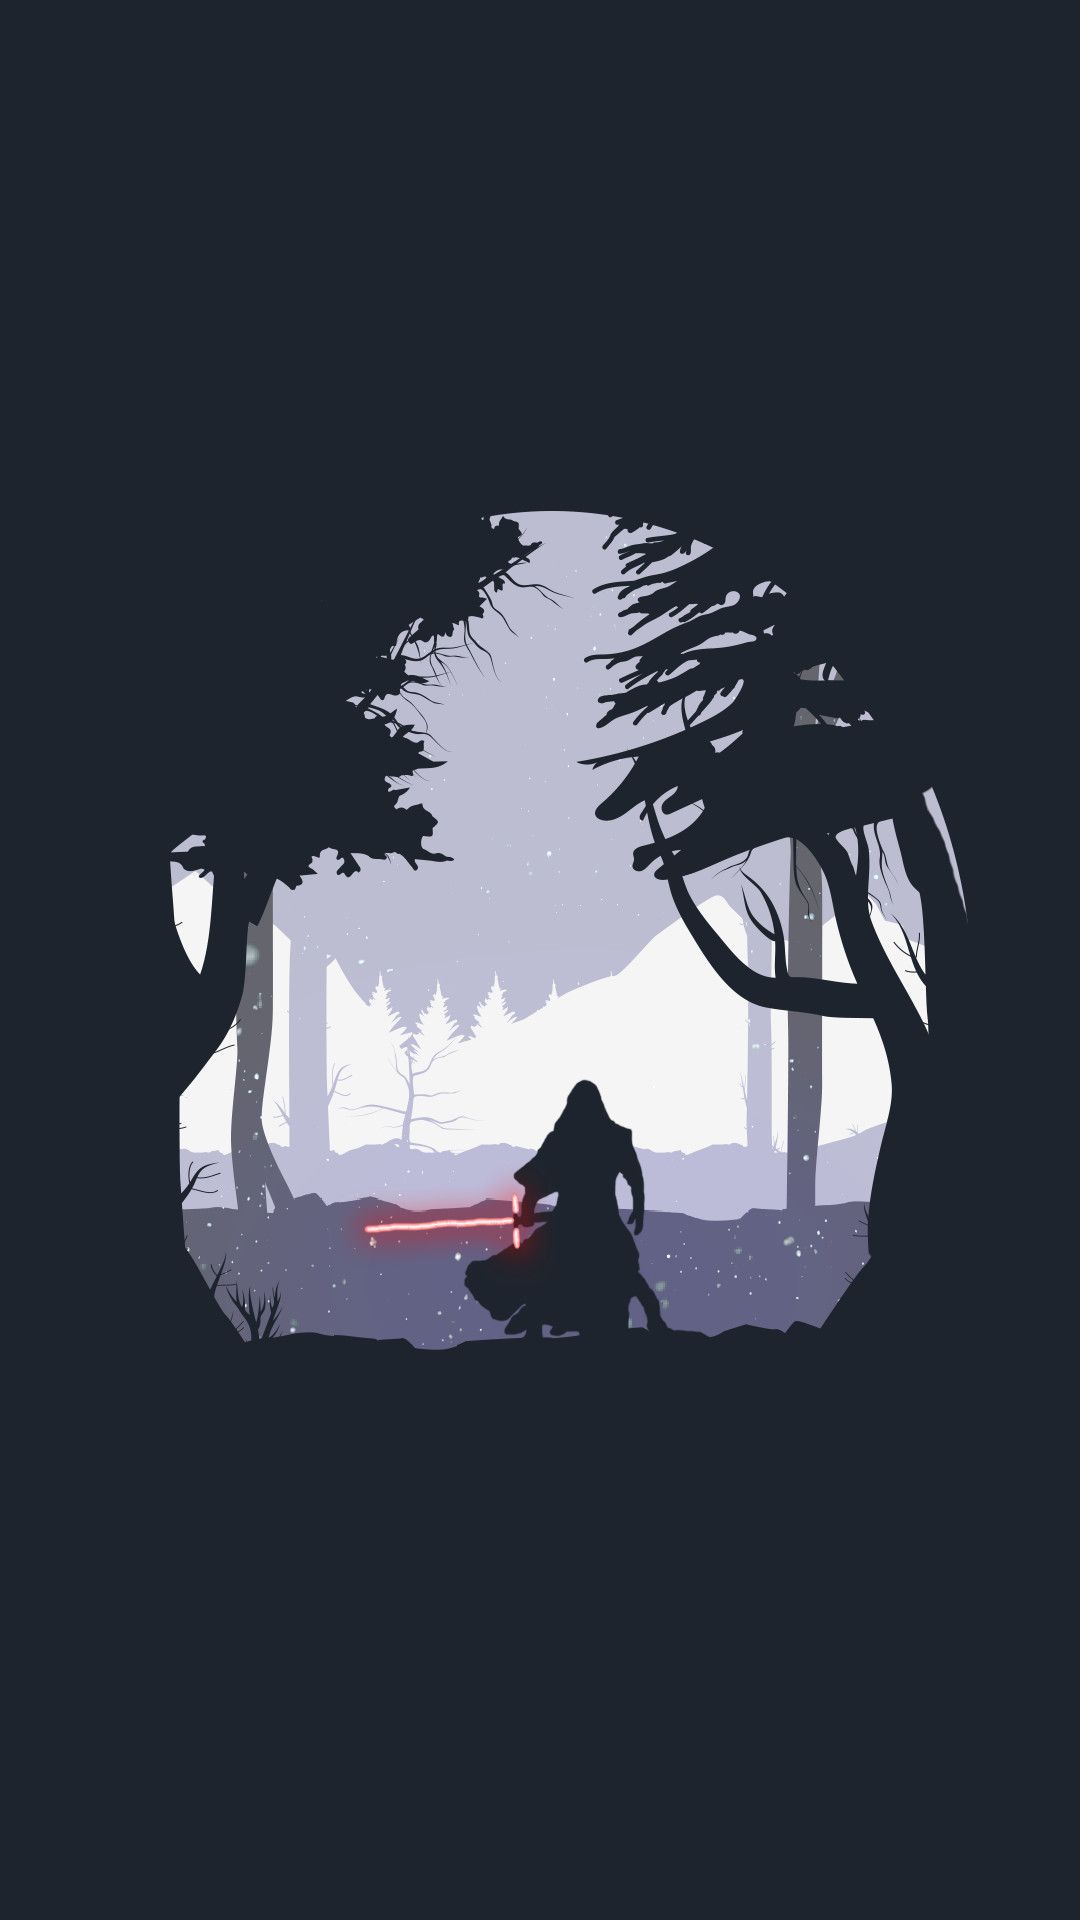 Star Wars iPhone Wallpaper background picture